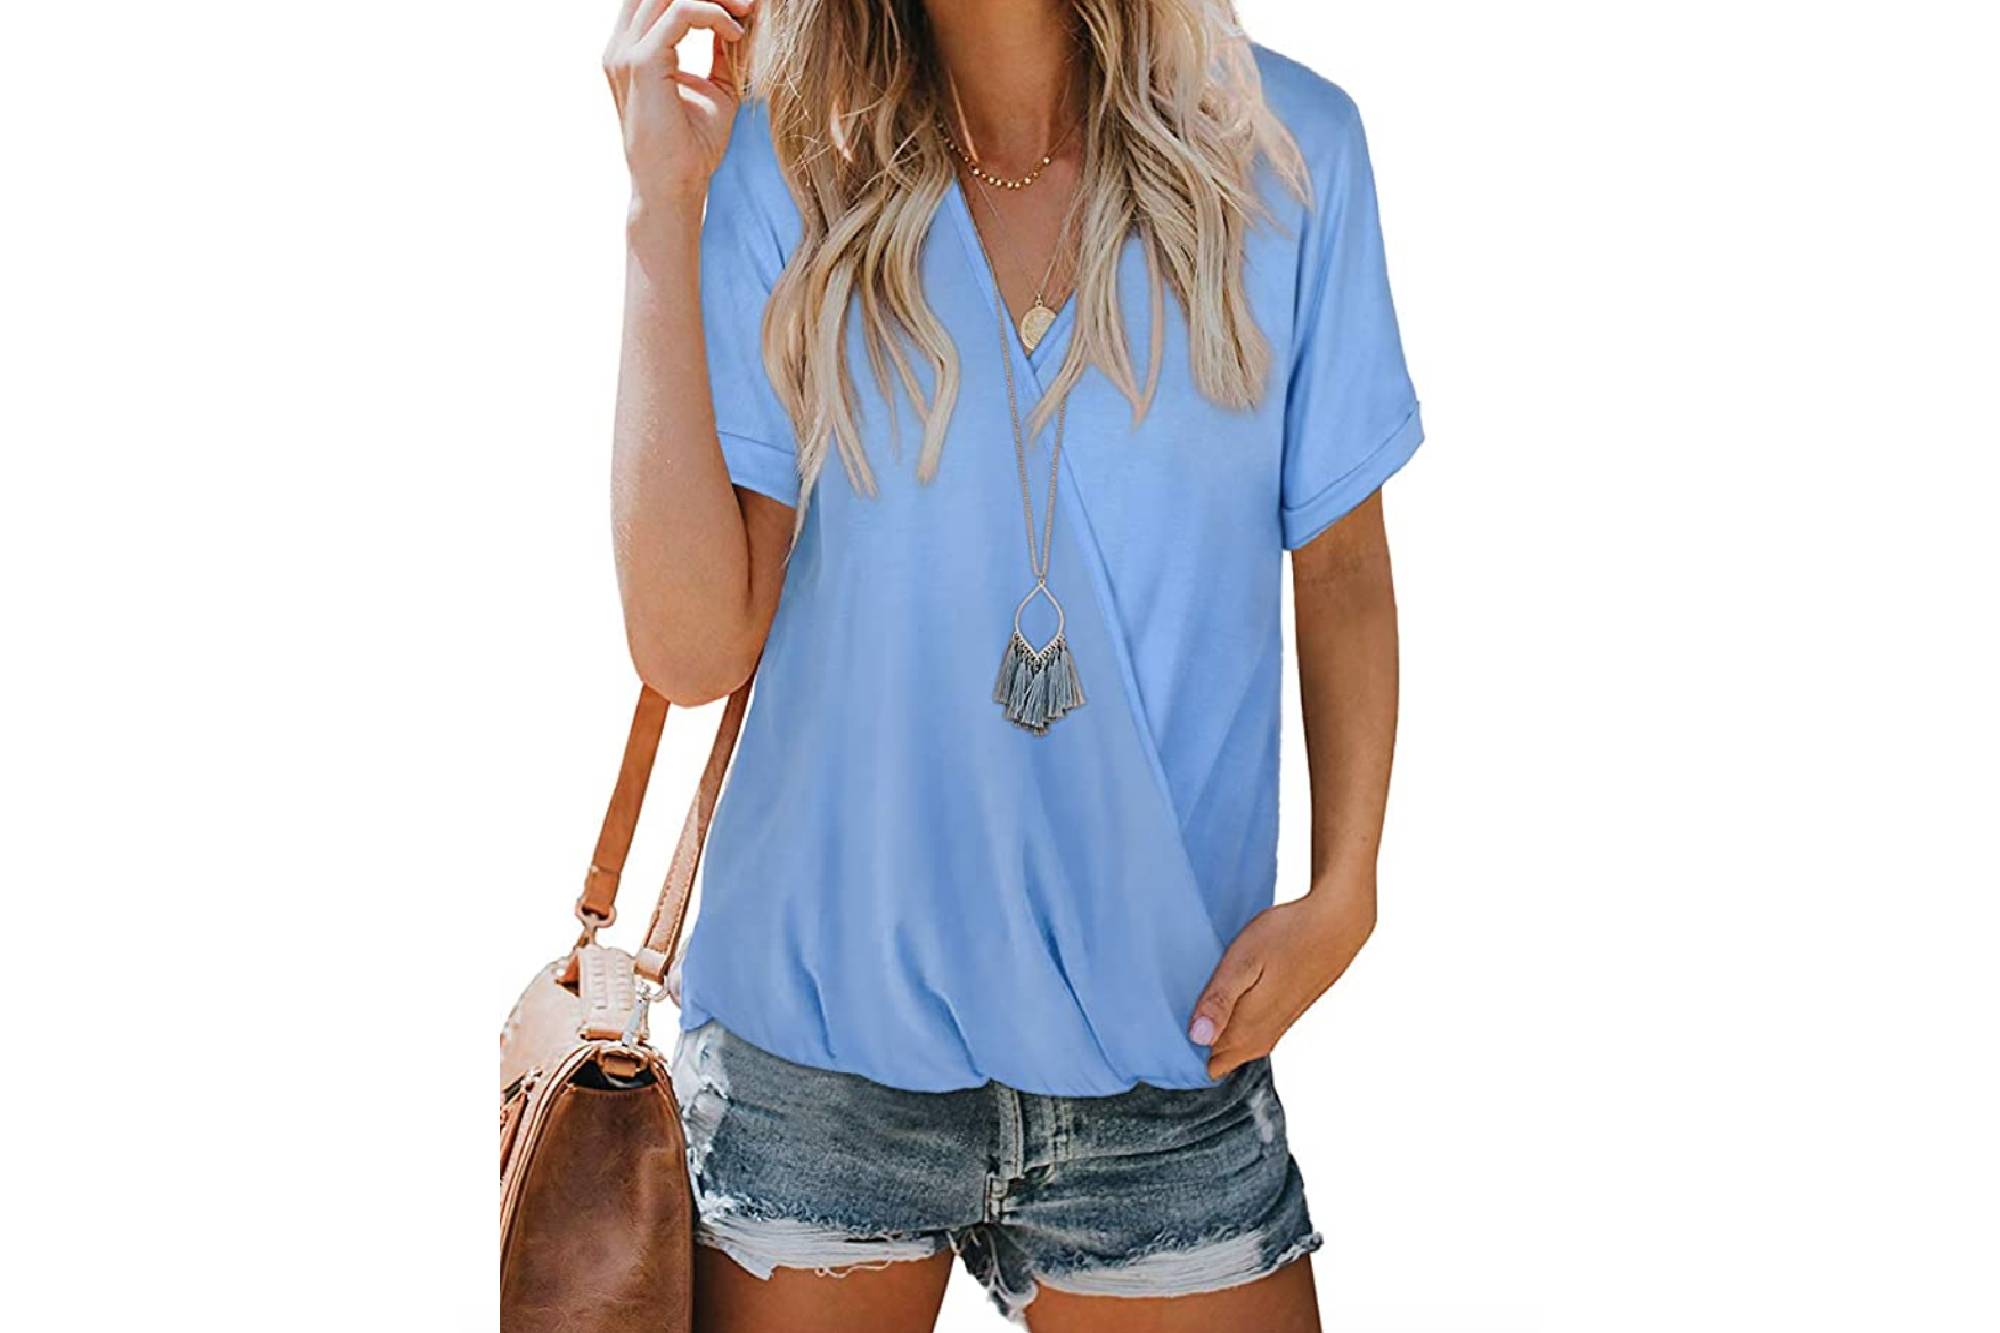 This Simple Wrap Top Is an Upgrade From Your Basic Tee